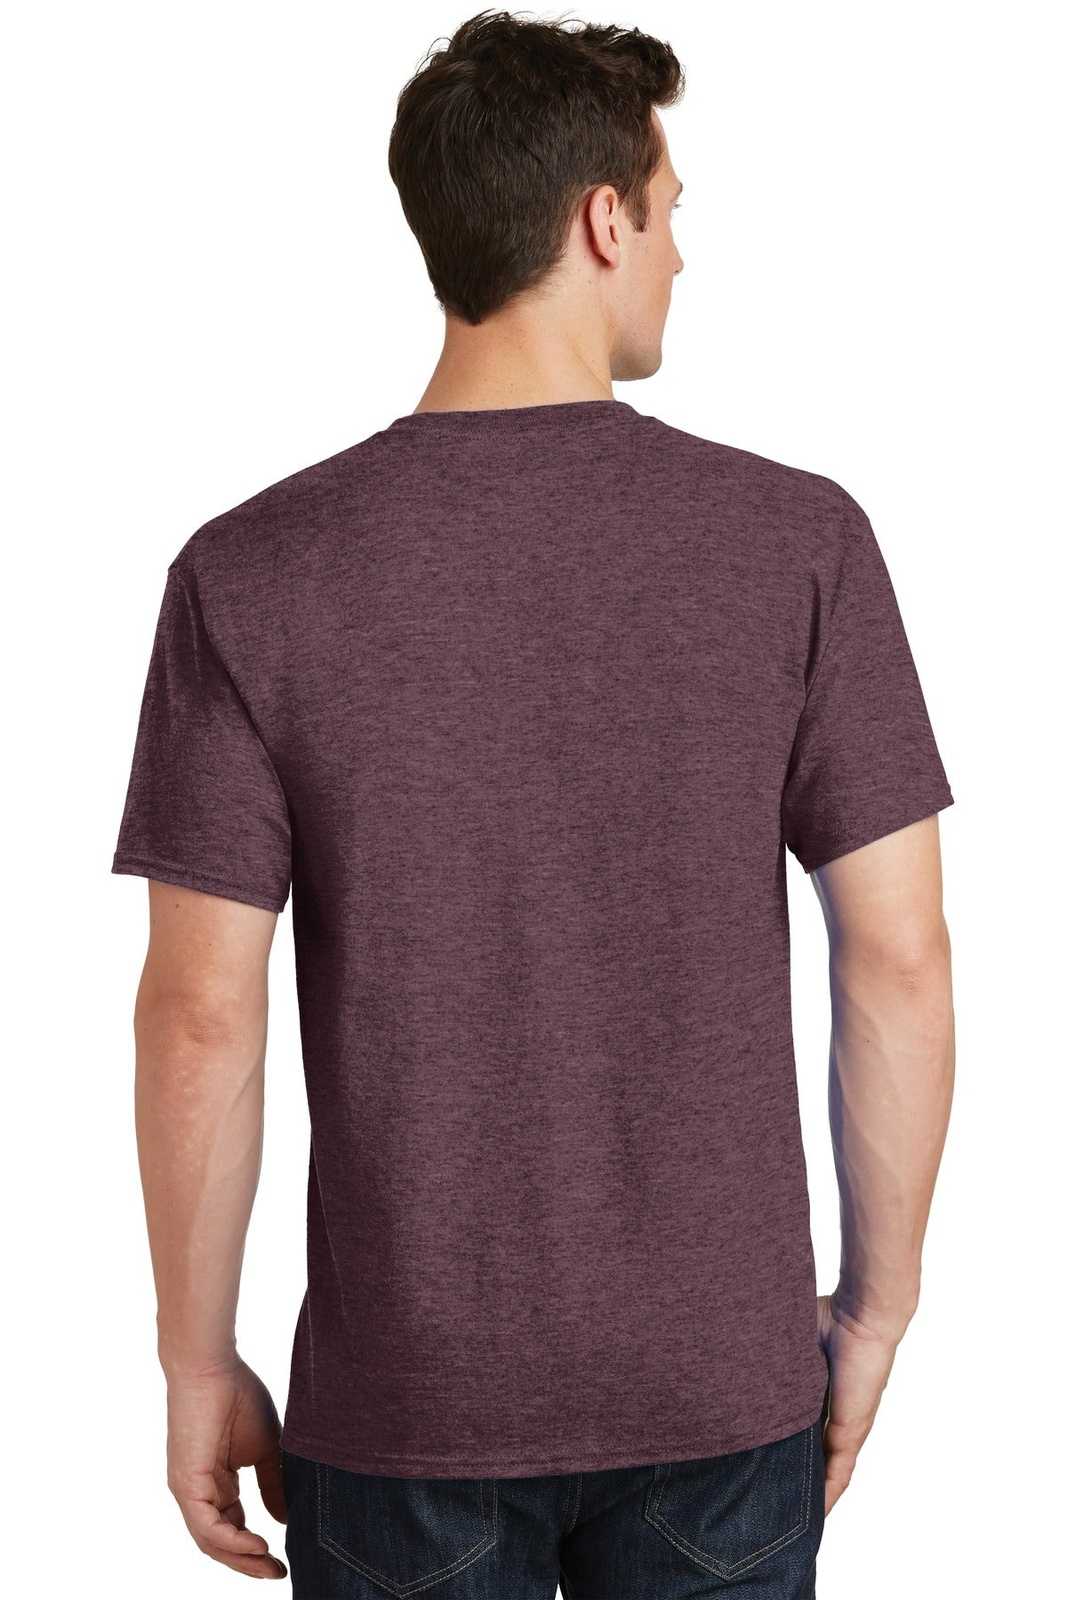 Port & Company PC54 Core Cotton Tee - Heather Athletic Maroon - HIT a Double - 1